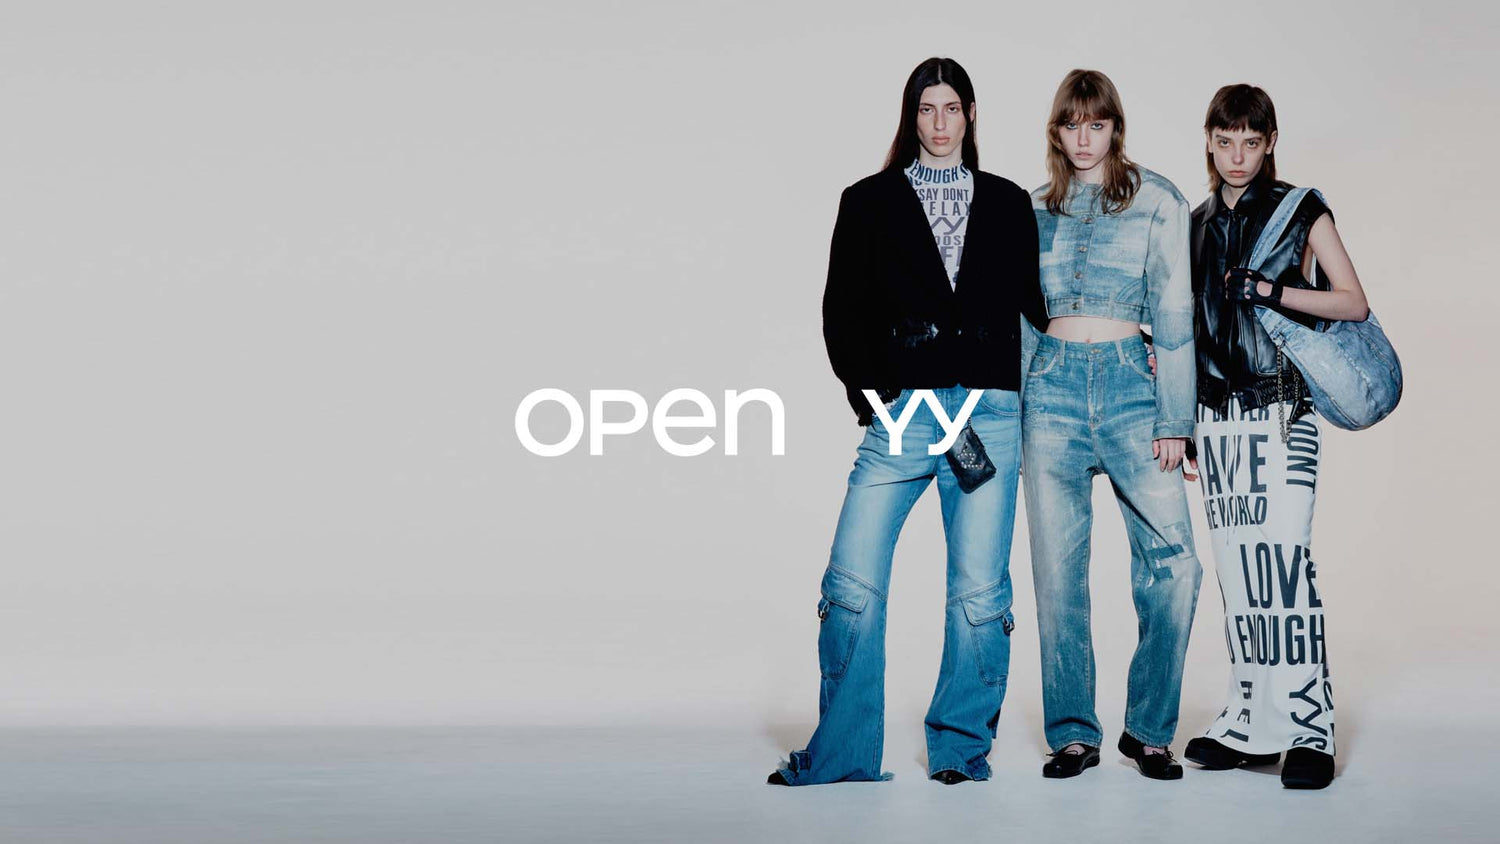 OPEN YY - THE OPEN PRODUCT